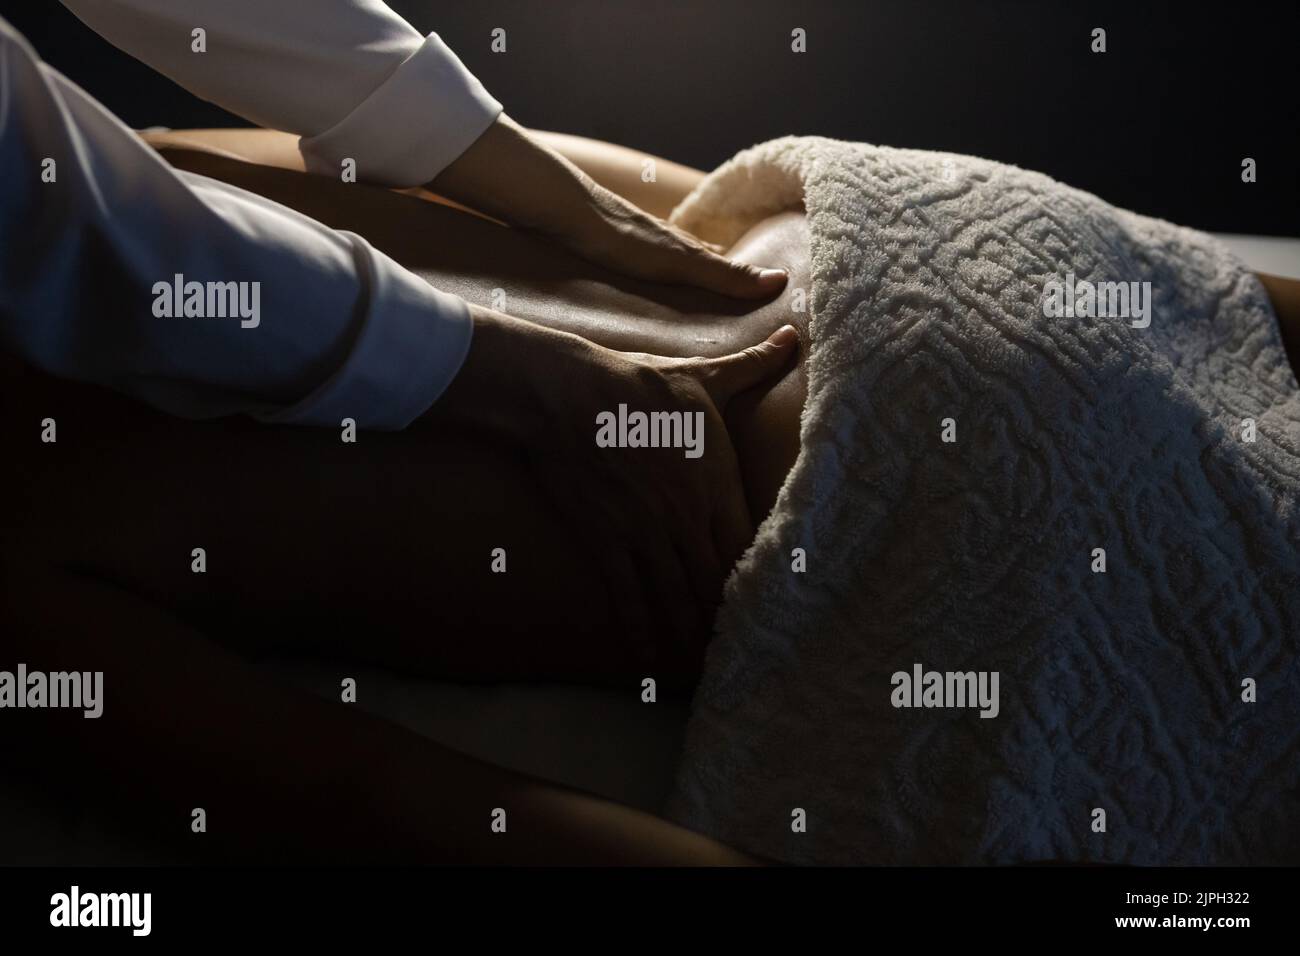 Goiânia, Goias, Brazil – July 18, 2022: Detail of a massage therapist massaging the back of a patient who is lying on a stretcher. Dark background. Stock Photo